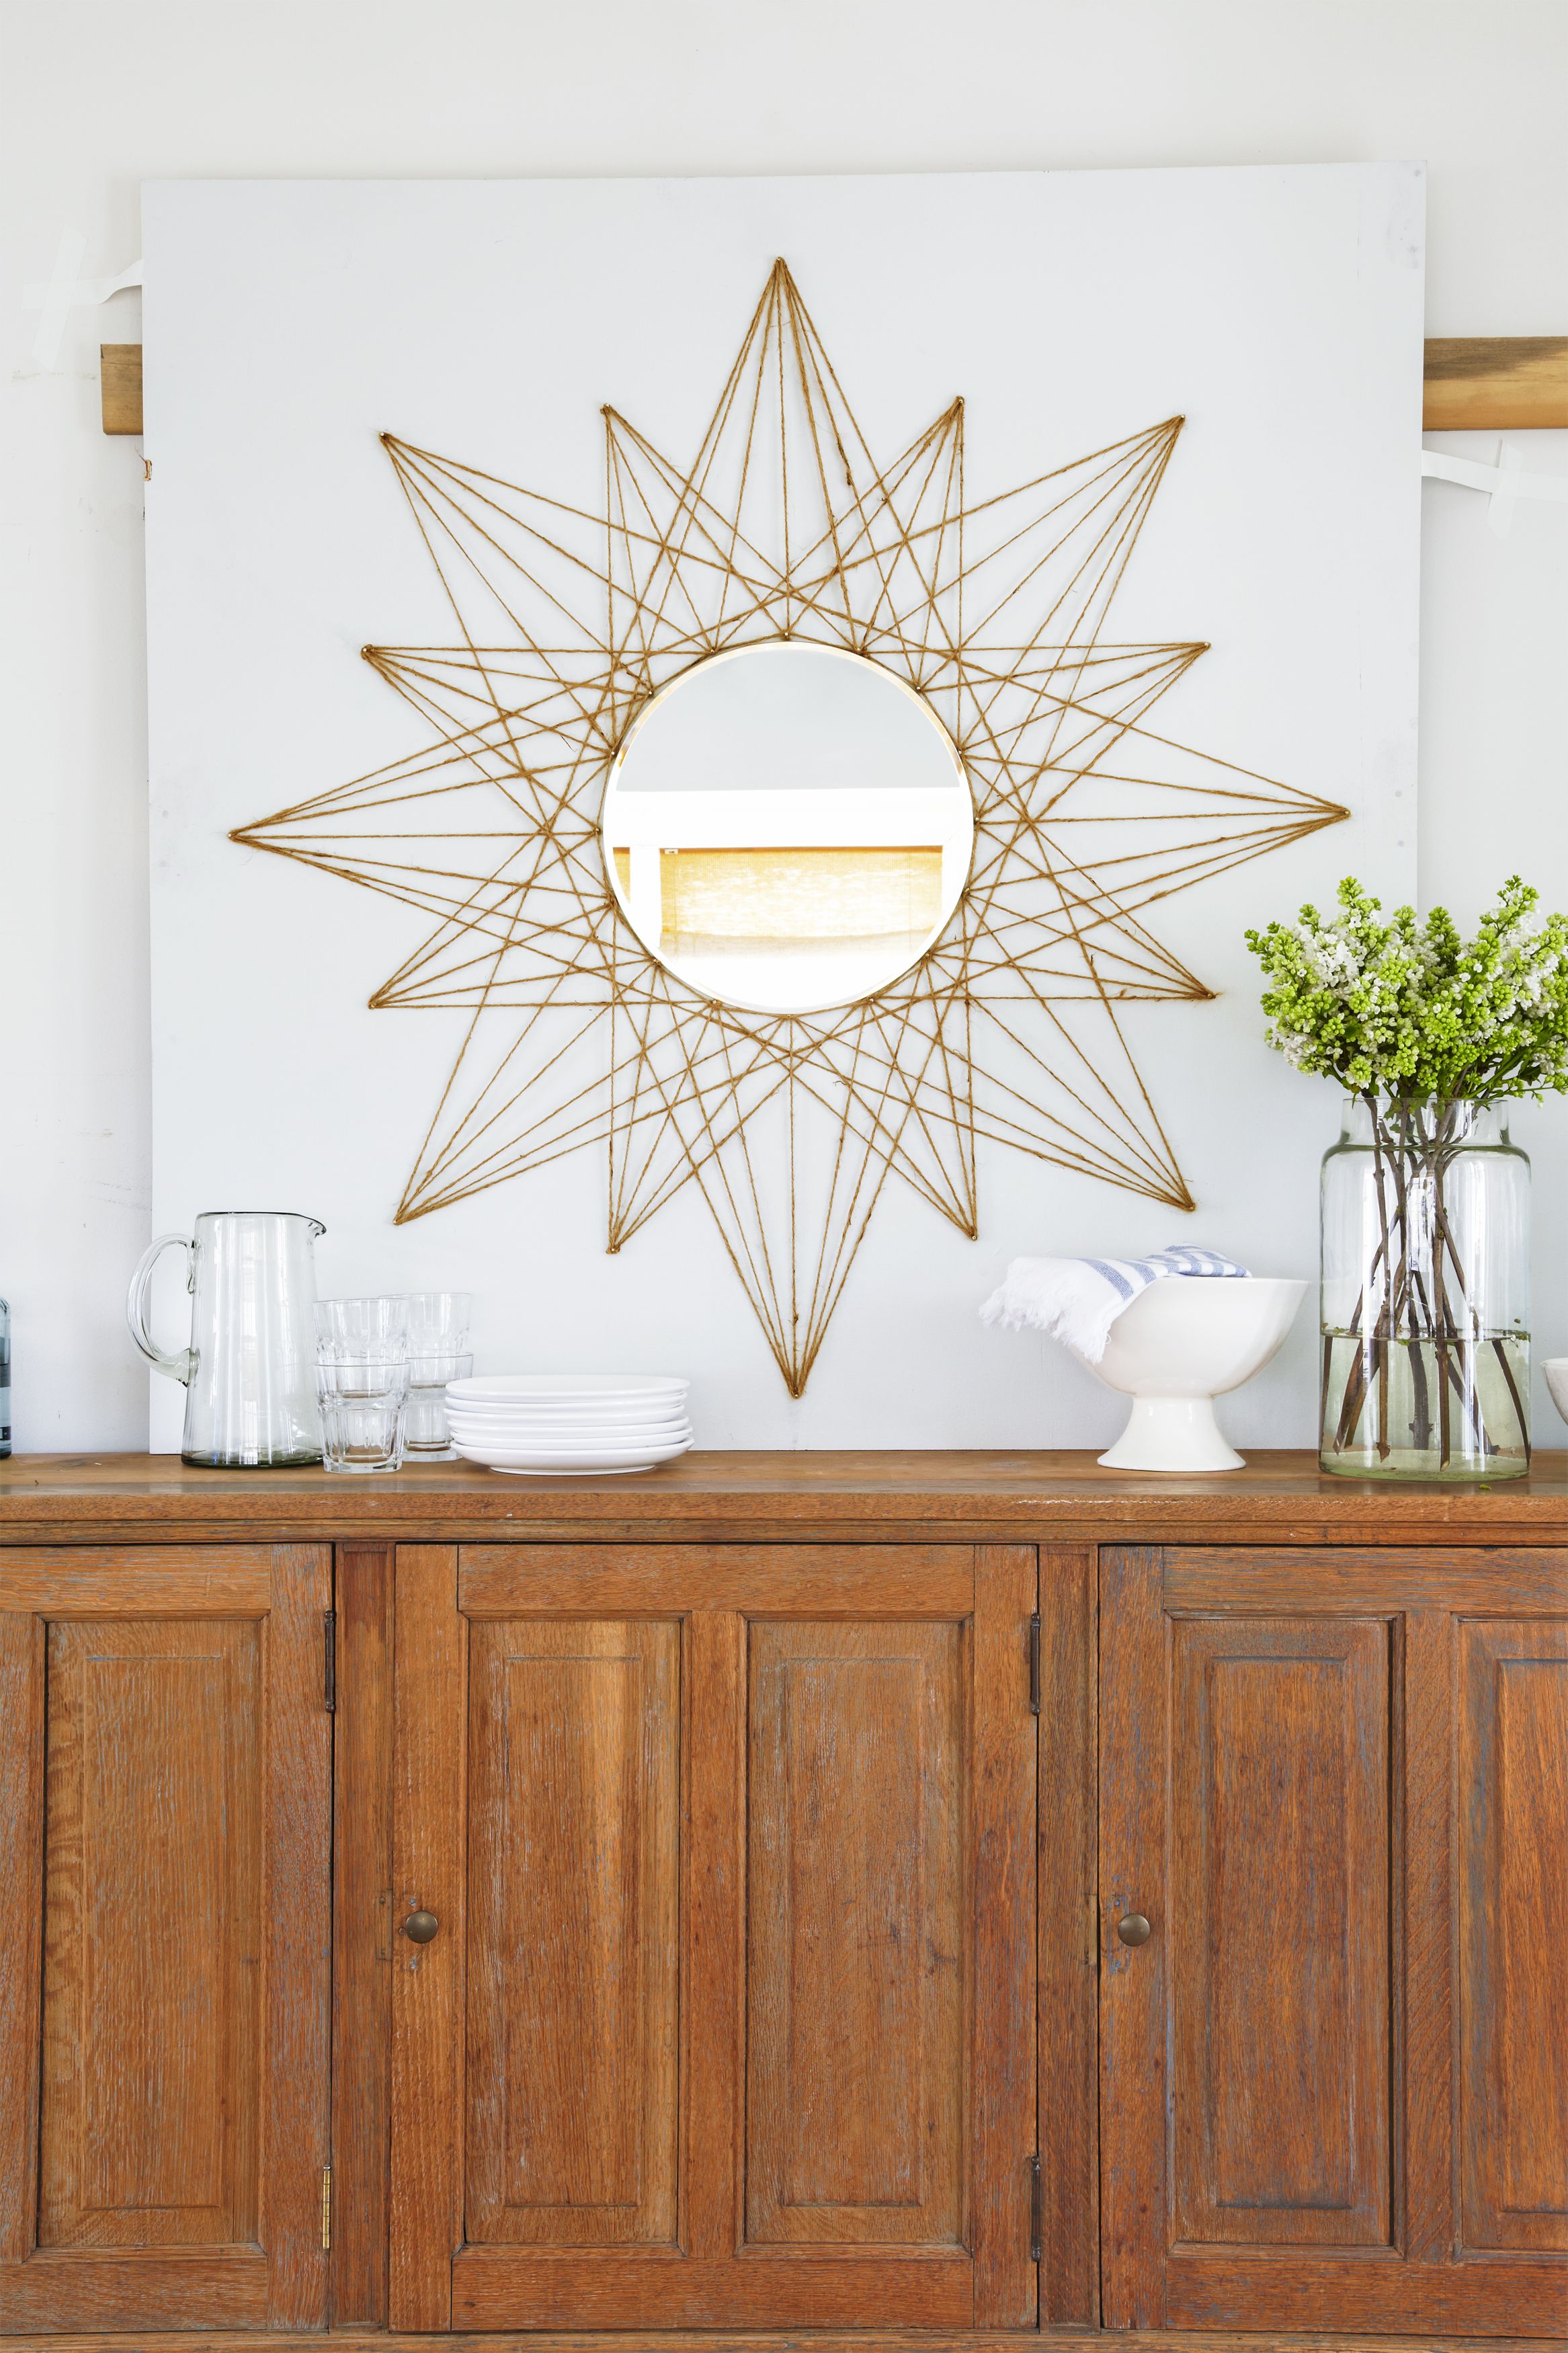 This Simple Mirror Diy Will Upgrade Any Boring Wall In Your Home How To Make Easy Star Rope - Star Wall Mirror Art